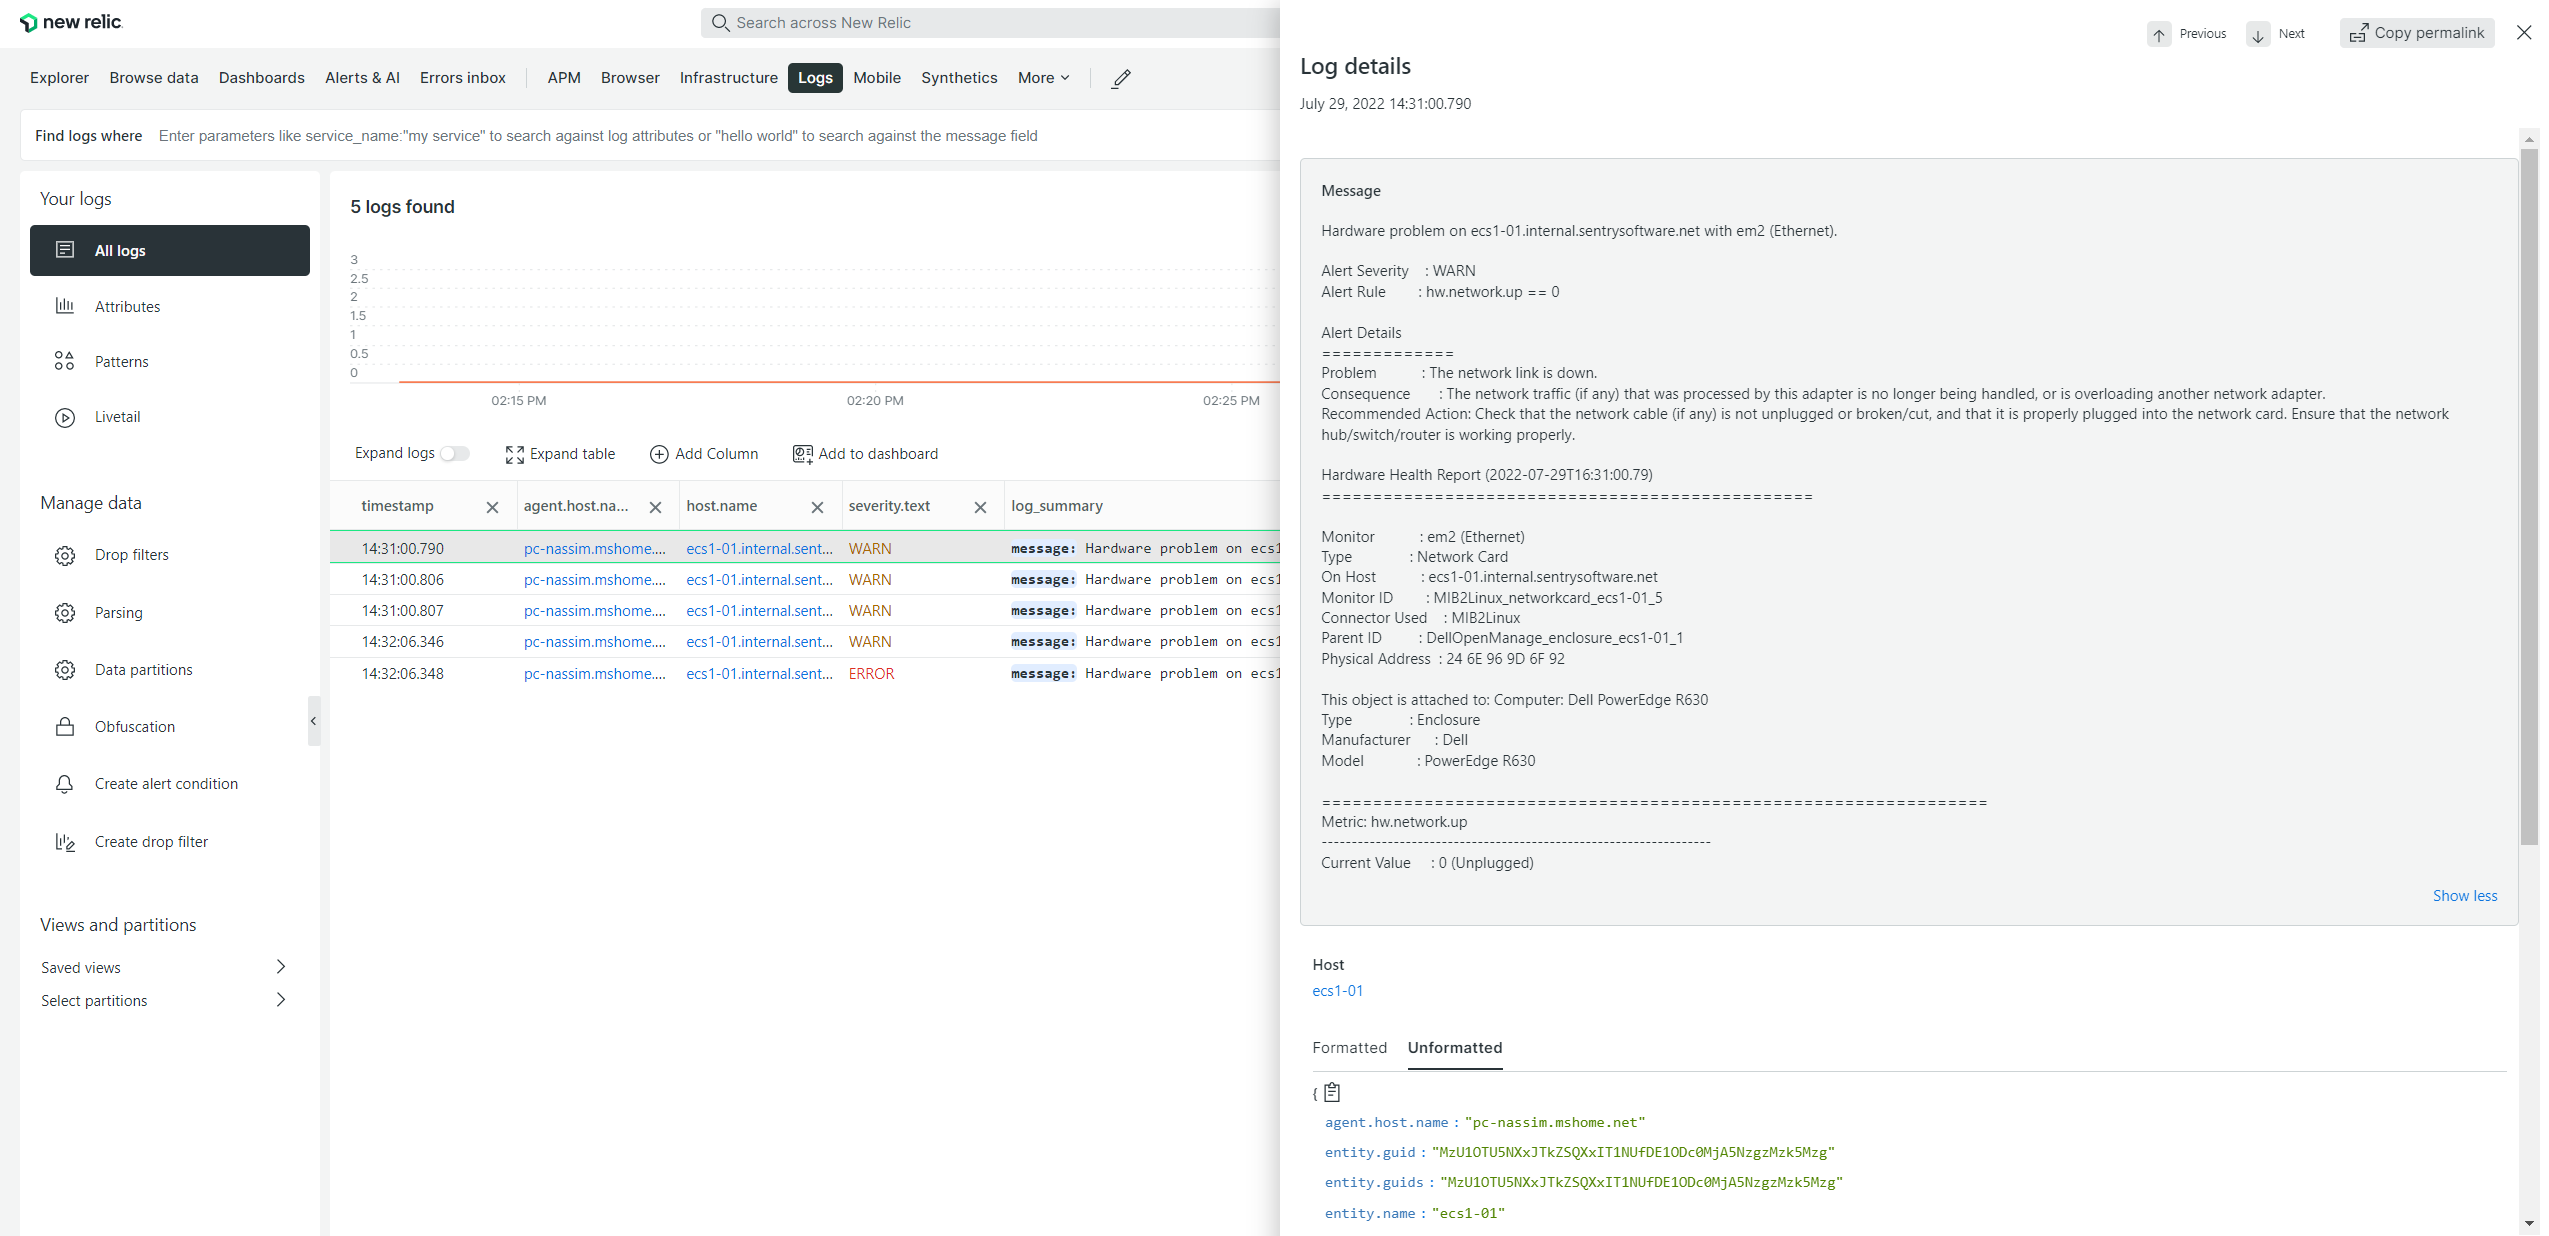 Screenshot of New Relic visualizing hardware problems as logs